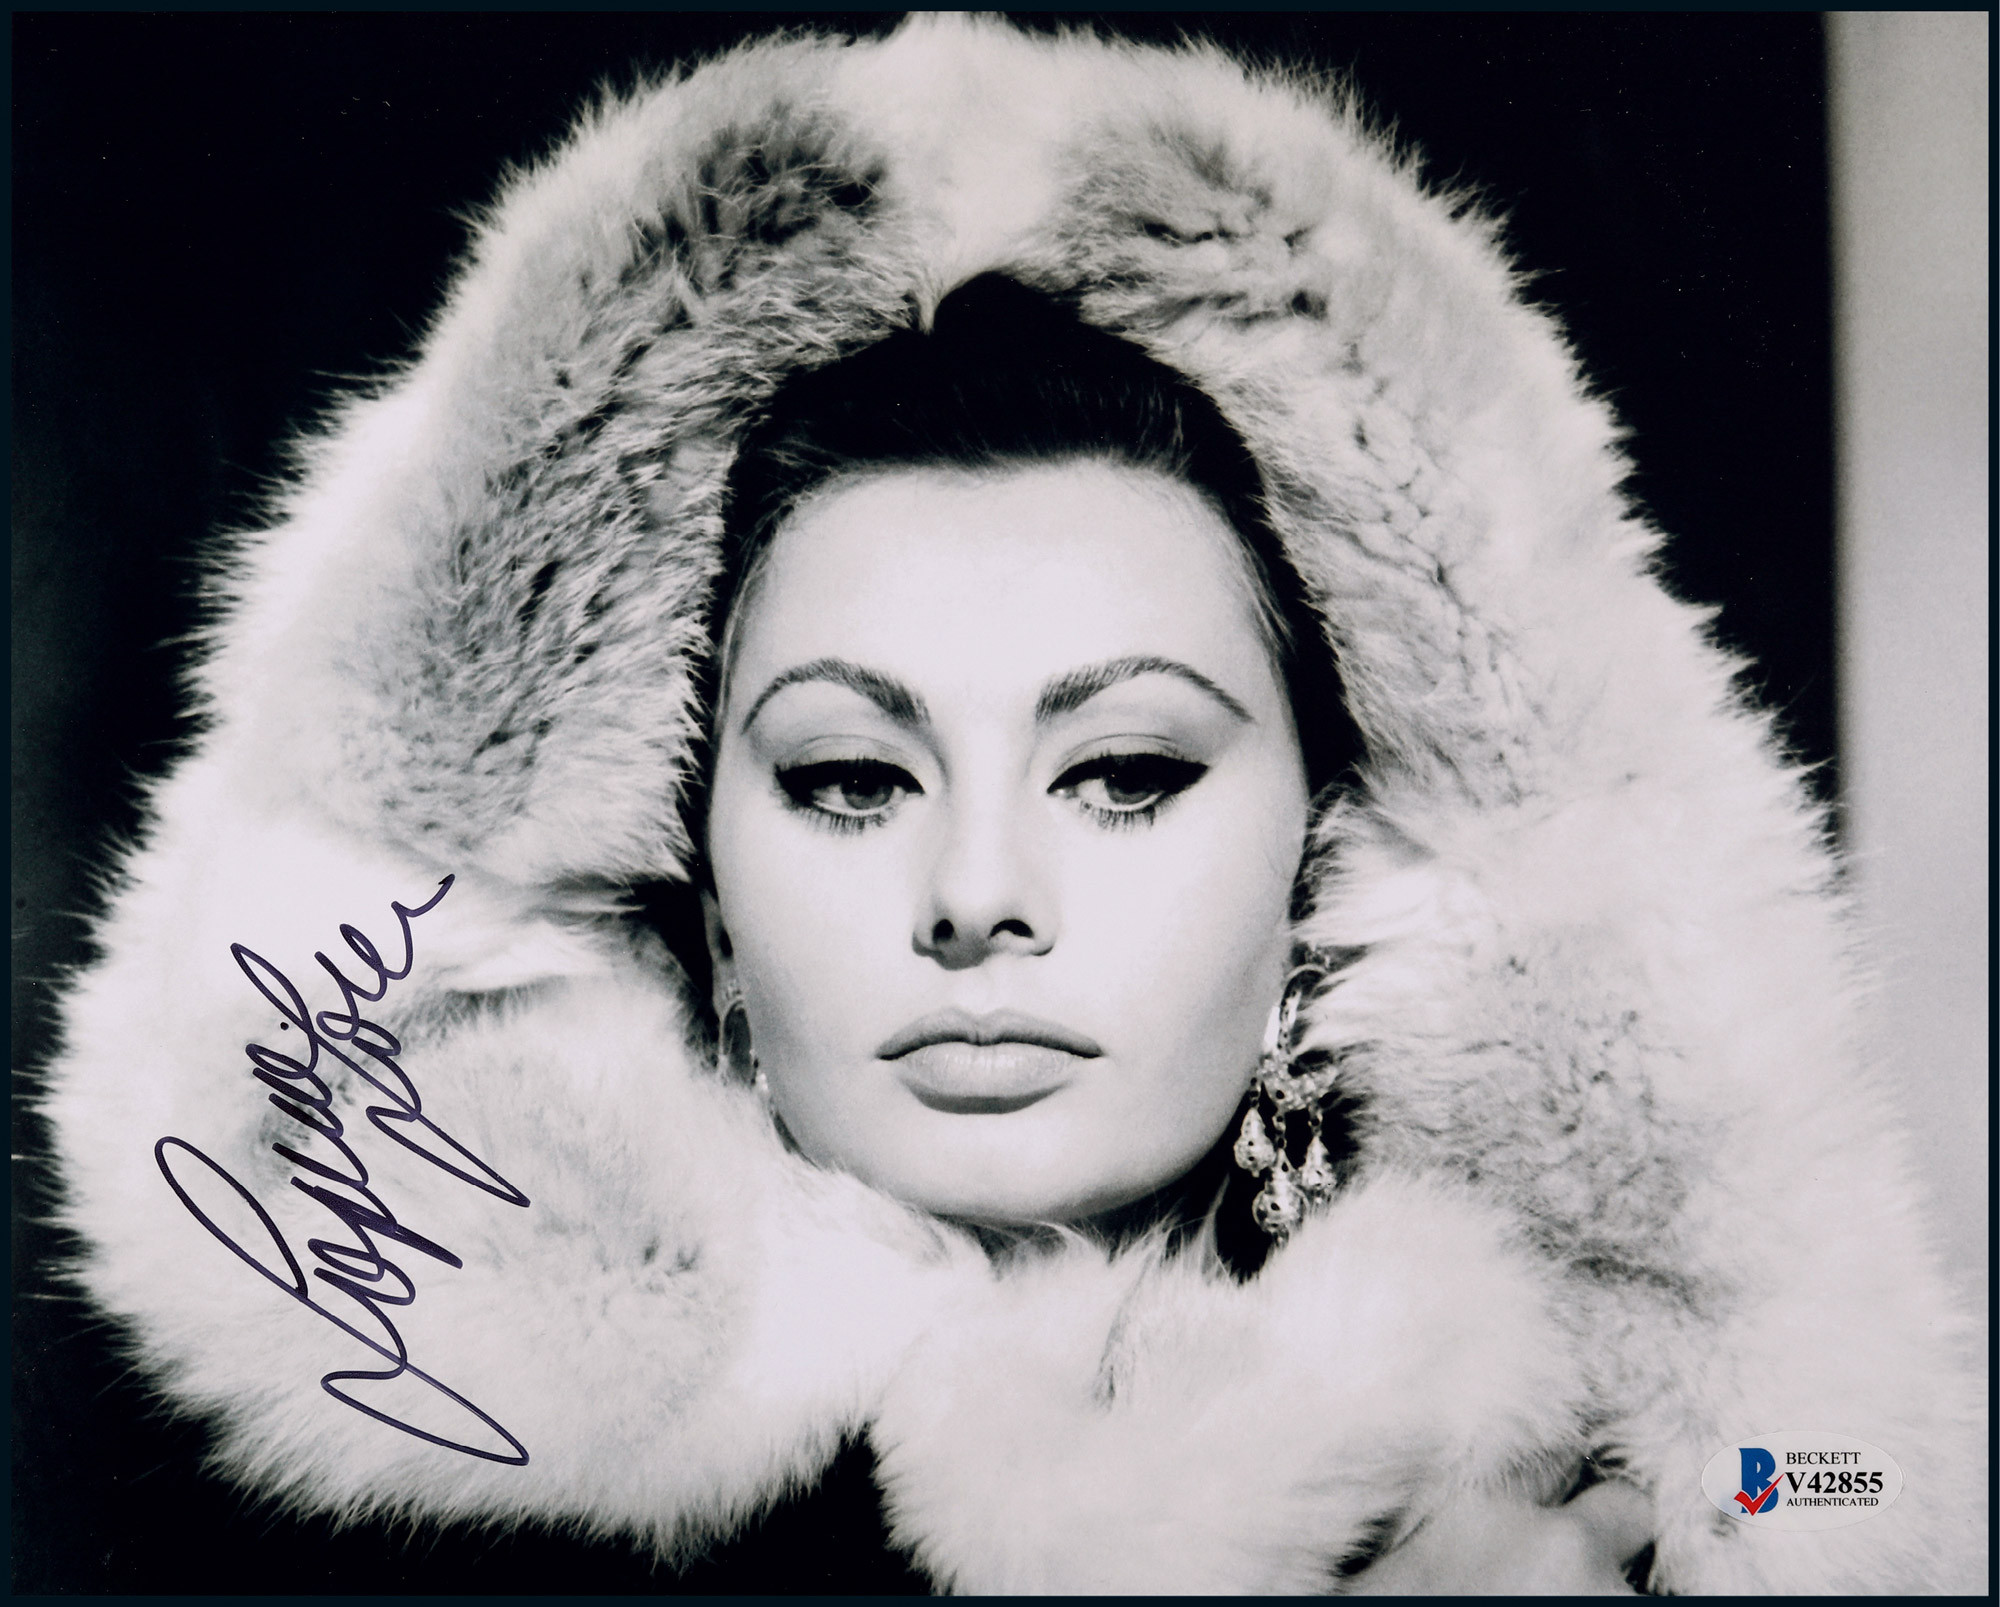 The autographed photo of Sophia Loren, “the famous Italian actress”, with certificate